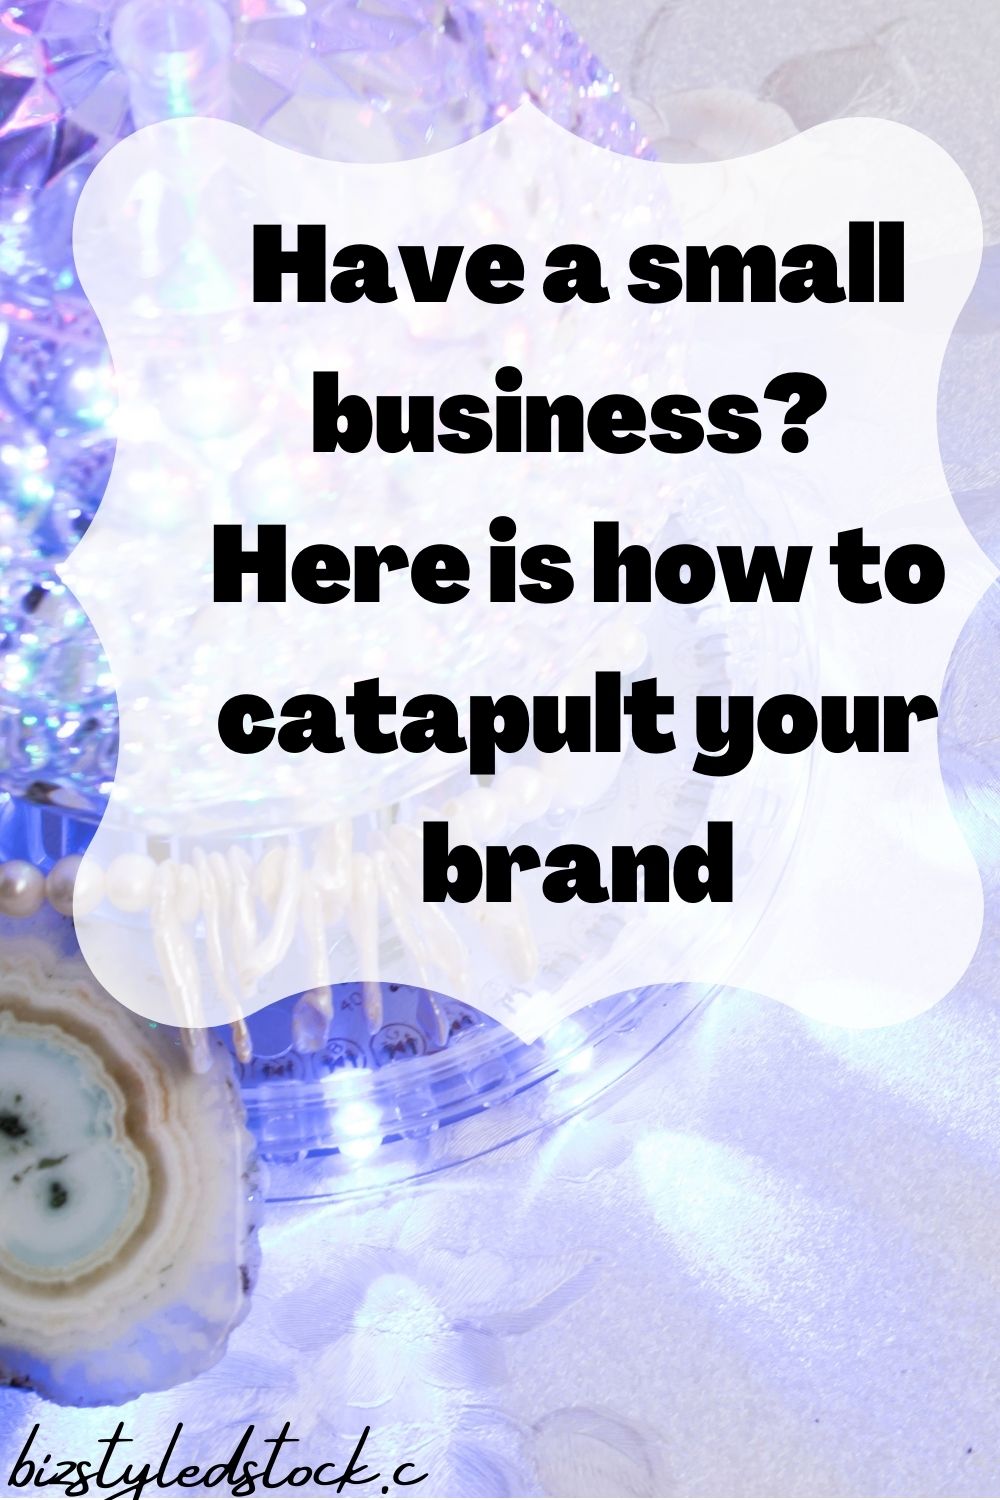 Have a small business Here is how to catapult your brand -Guide With Easy Steps build a brand entrepreneur social media business check list questions to ask #brand.jpg